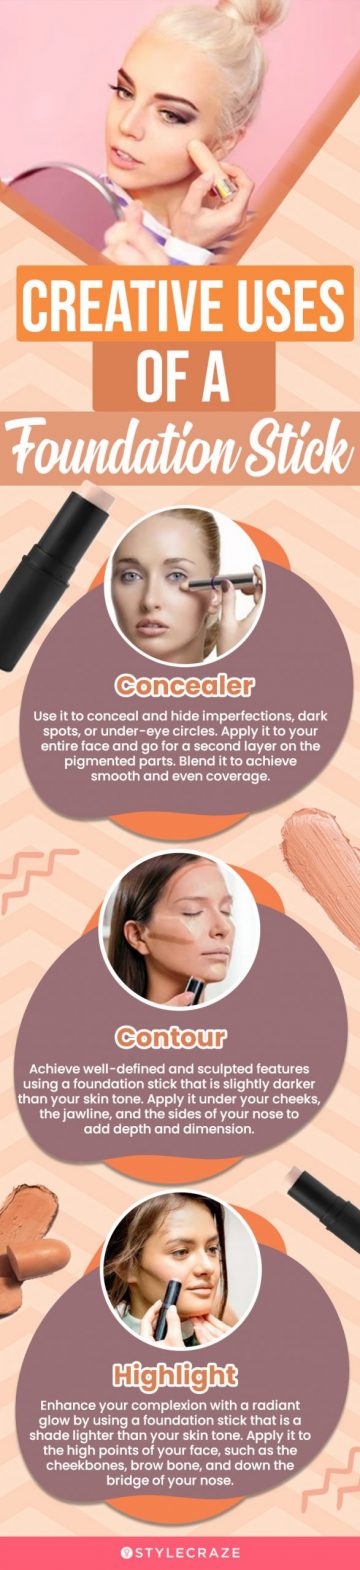 Creative Uses For A Foundation Stick (infographic)